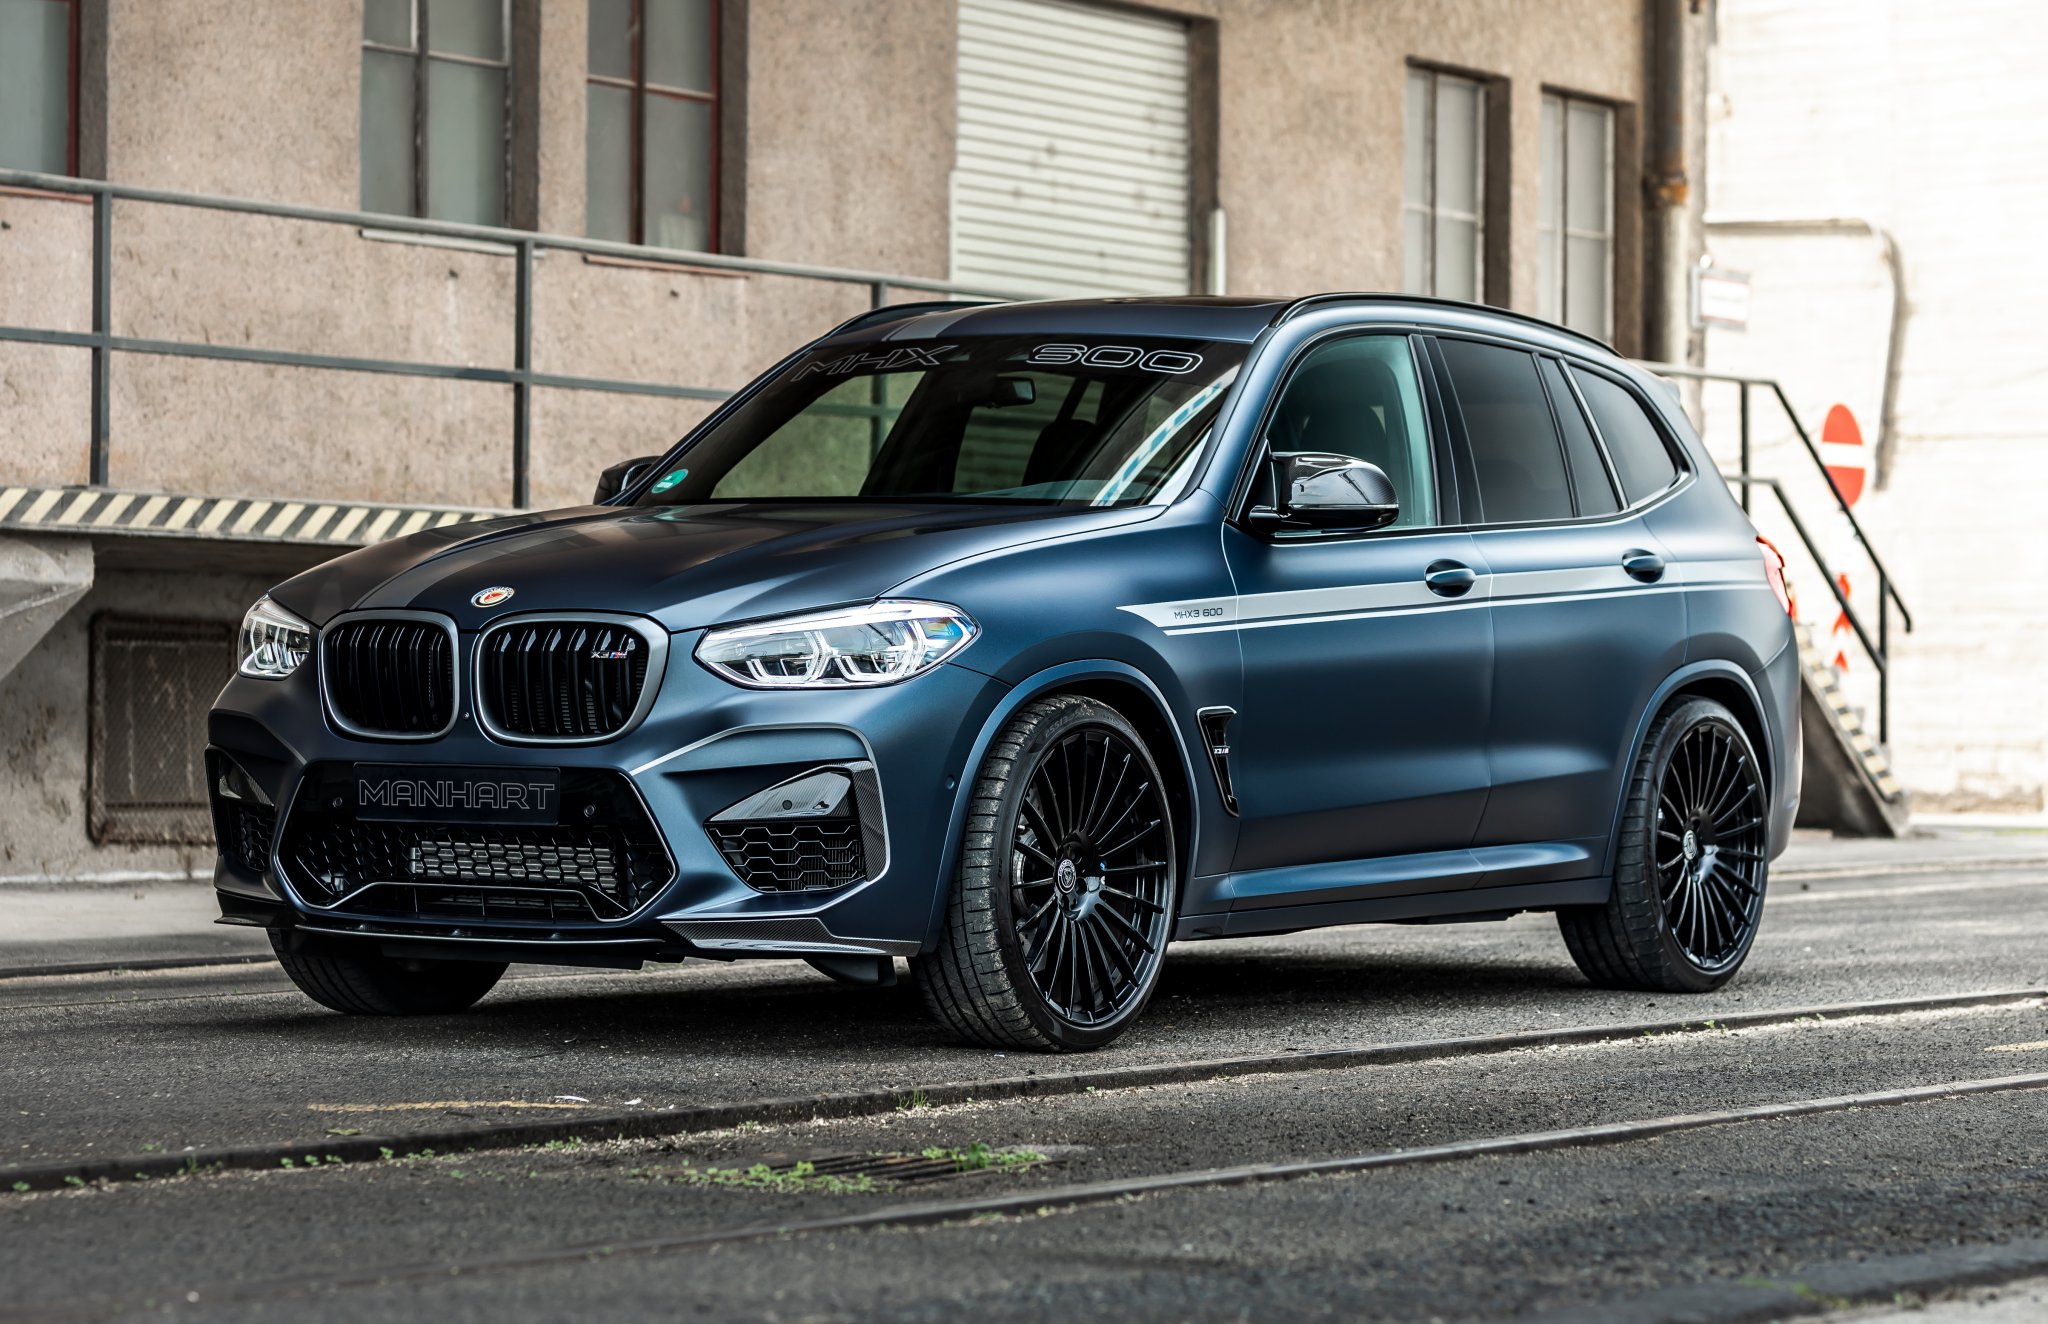 Check our price and buy an Manhart carbon fiber body kit for BMW X3 M F97!